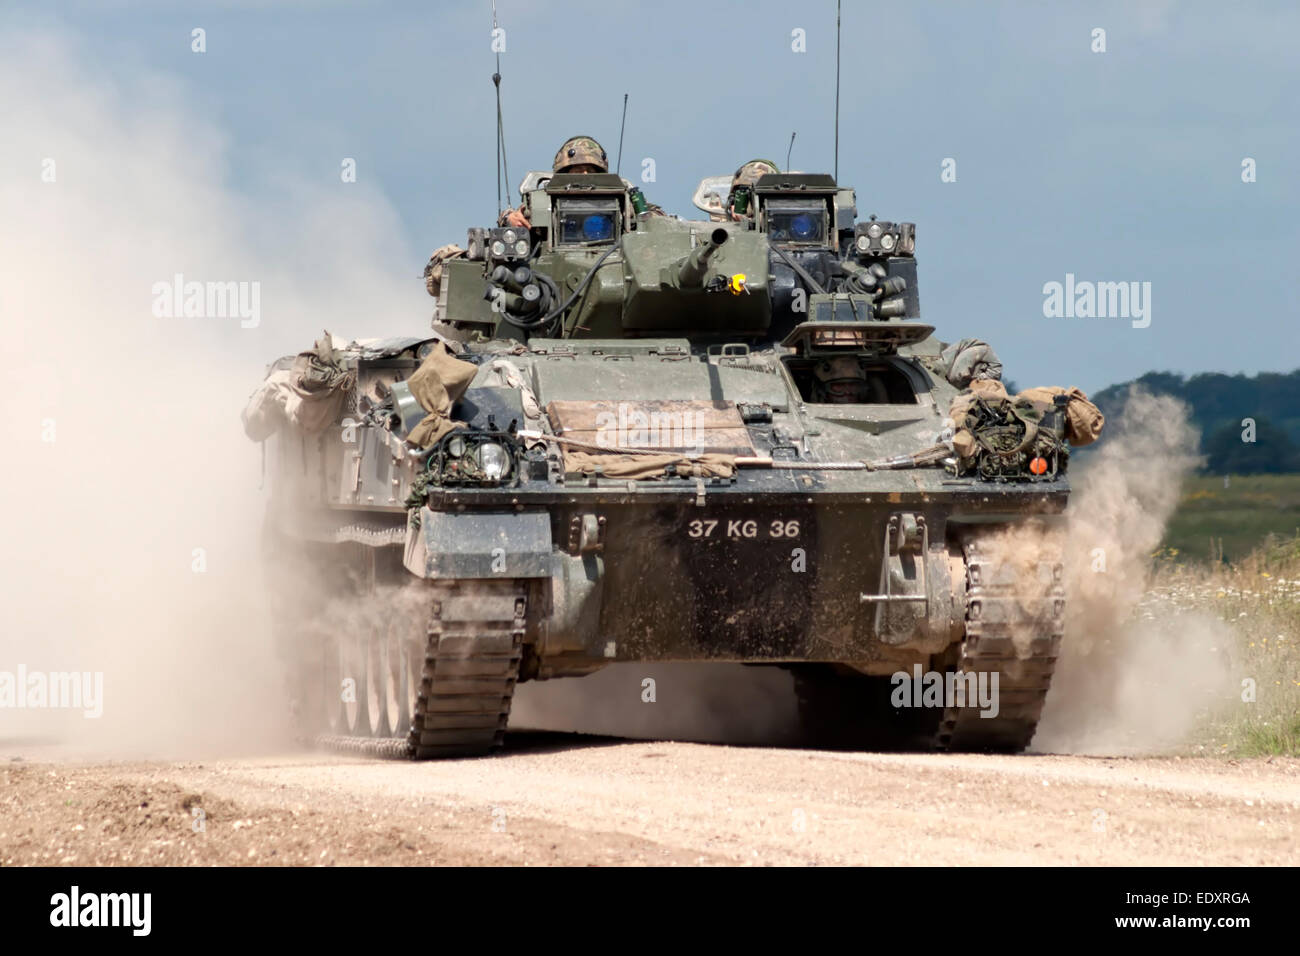 A British Army Warrior Infantry Fighting Vehicle, on the Salisbury Plain military Training Area in Wiltshire, United Kingdom. Stock Photo